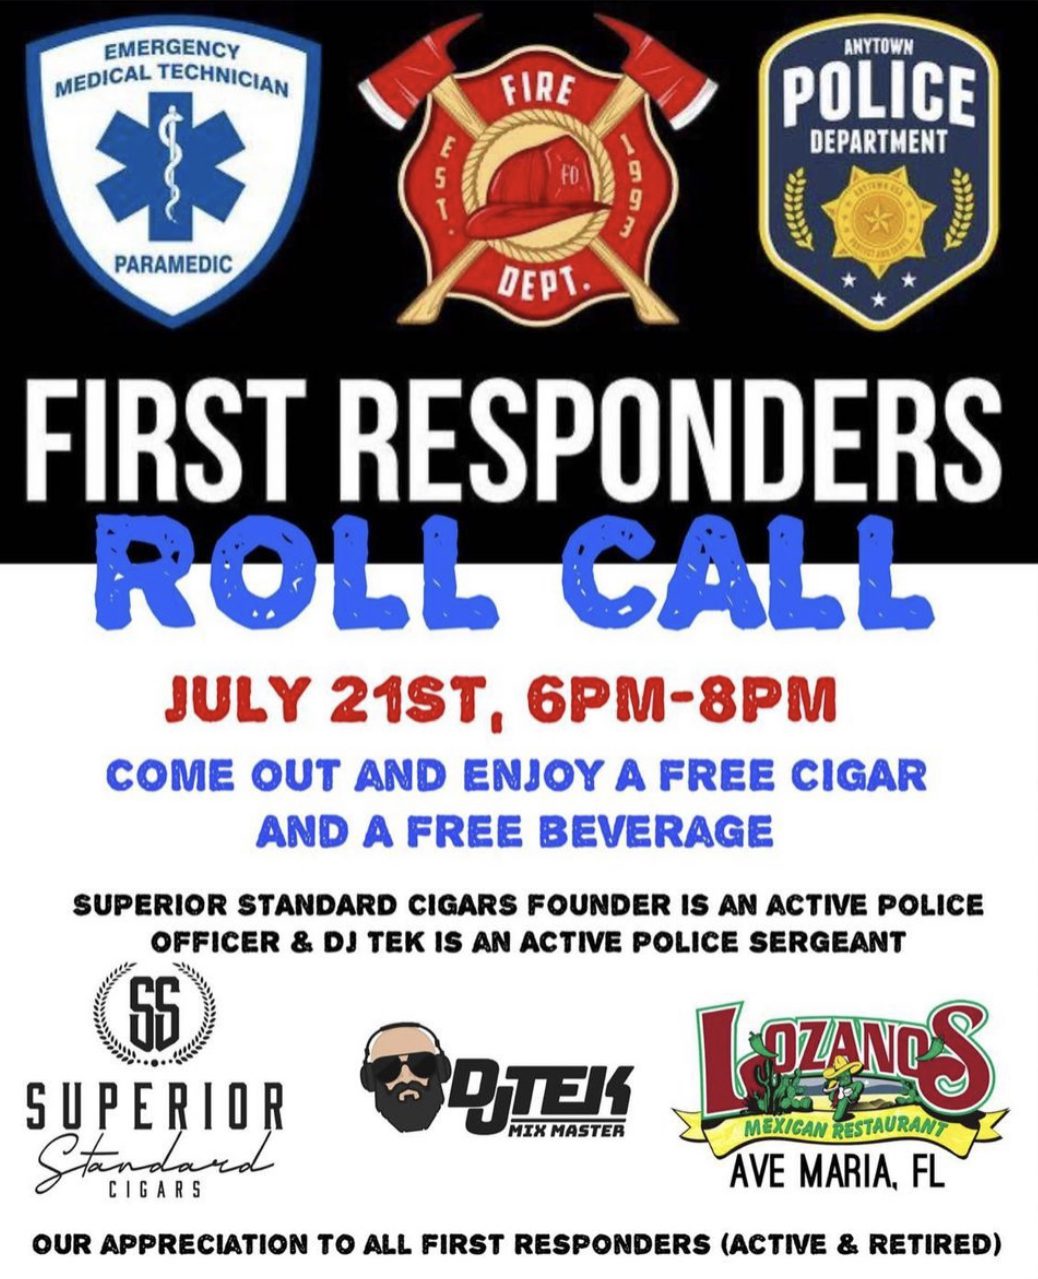 First Responders Roll Call at Lozano's Mexican Restaurant event flyer